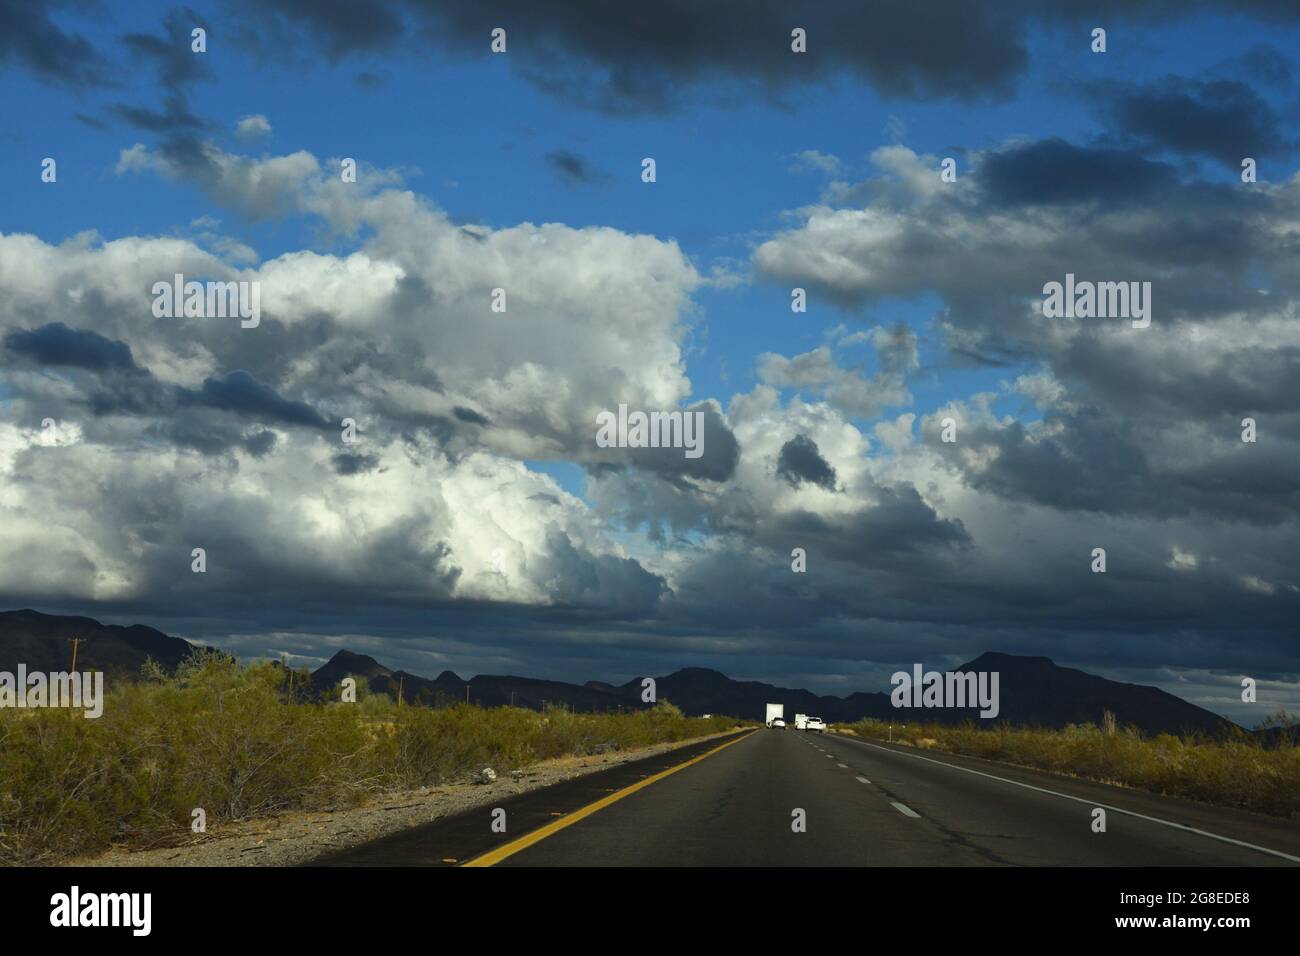 View from inside the car while driving on the highway towards the mountain with rain clouds in the sky. Cumulostratus cloud. Nimbostratus cloud. Stock Photo